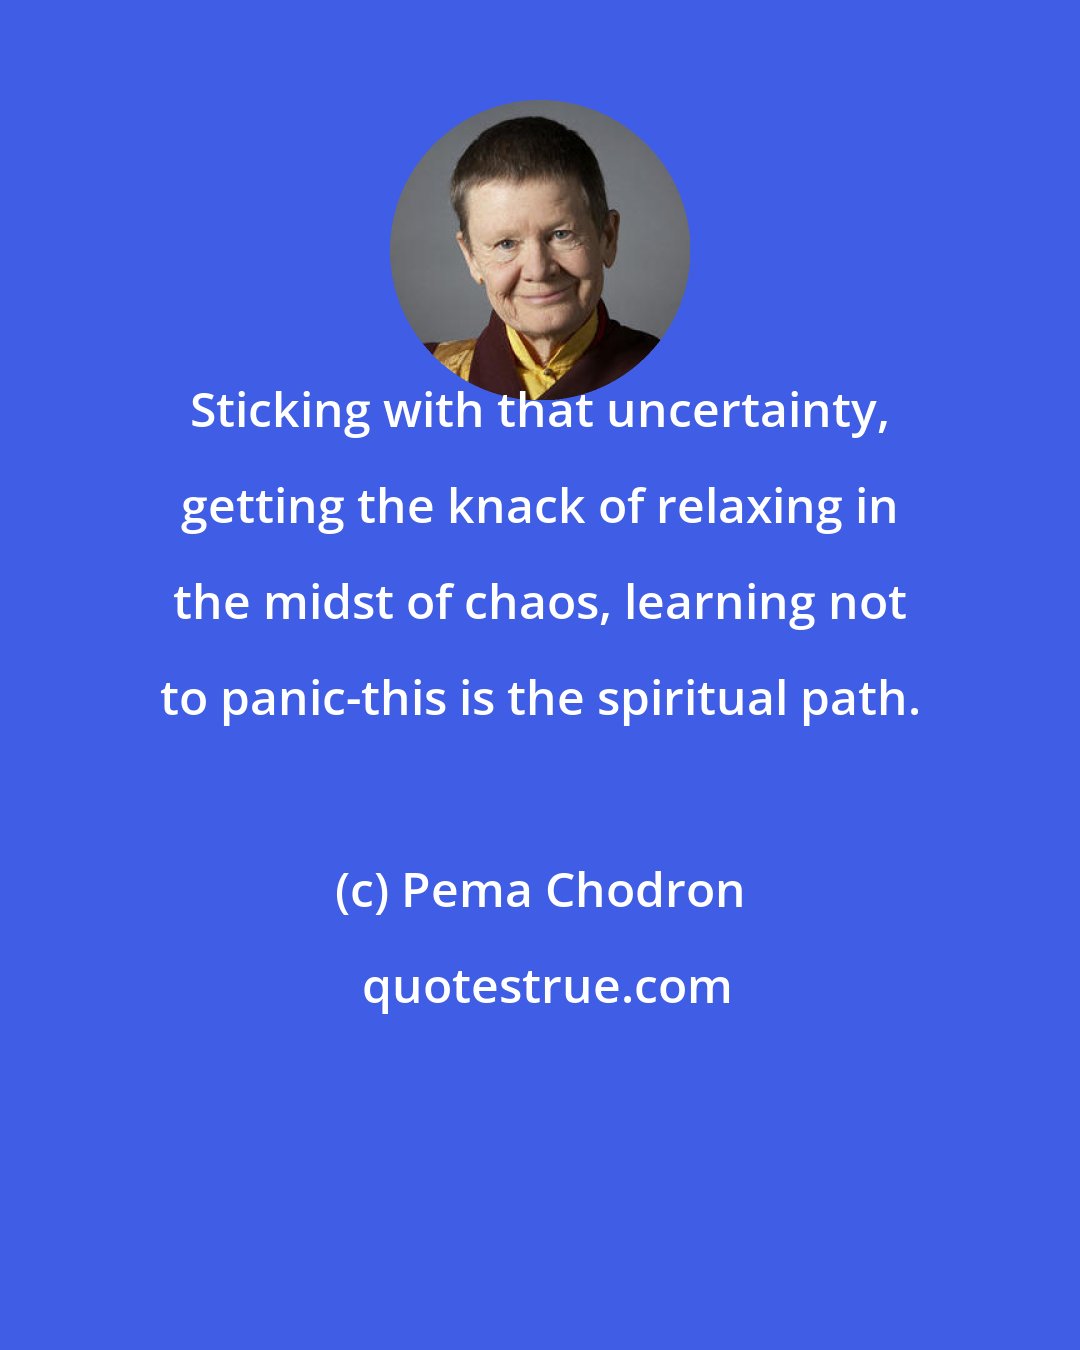 Pema Chodron: Sticking with that uncertainty, getting the knack of relaxing in the midst of chaos, learning not to panic-this is the spiritual path.